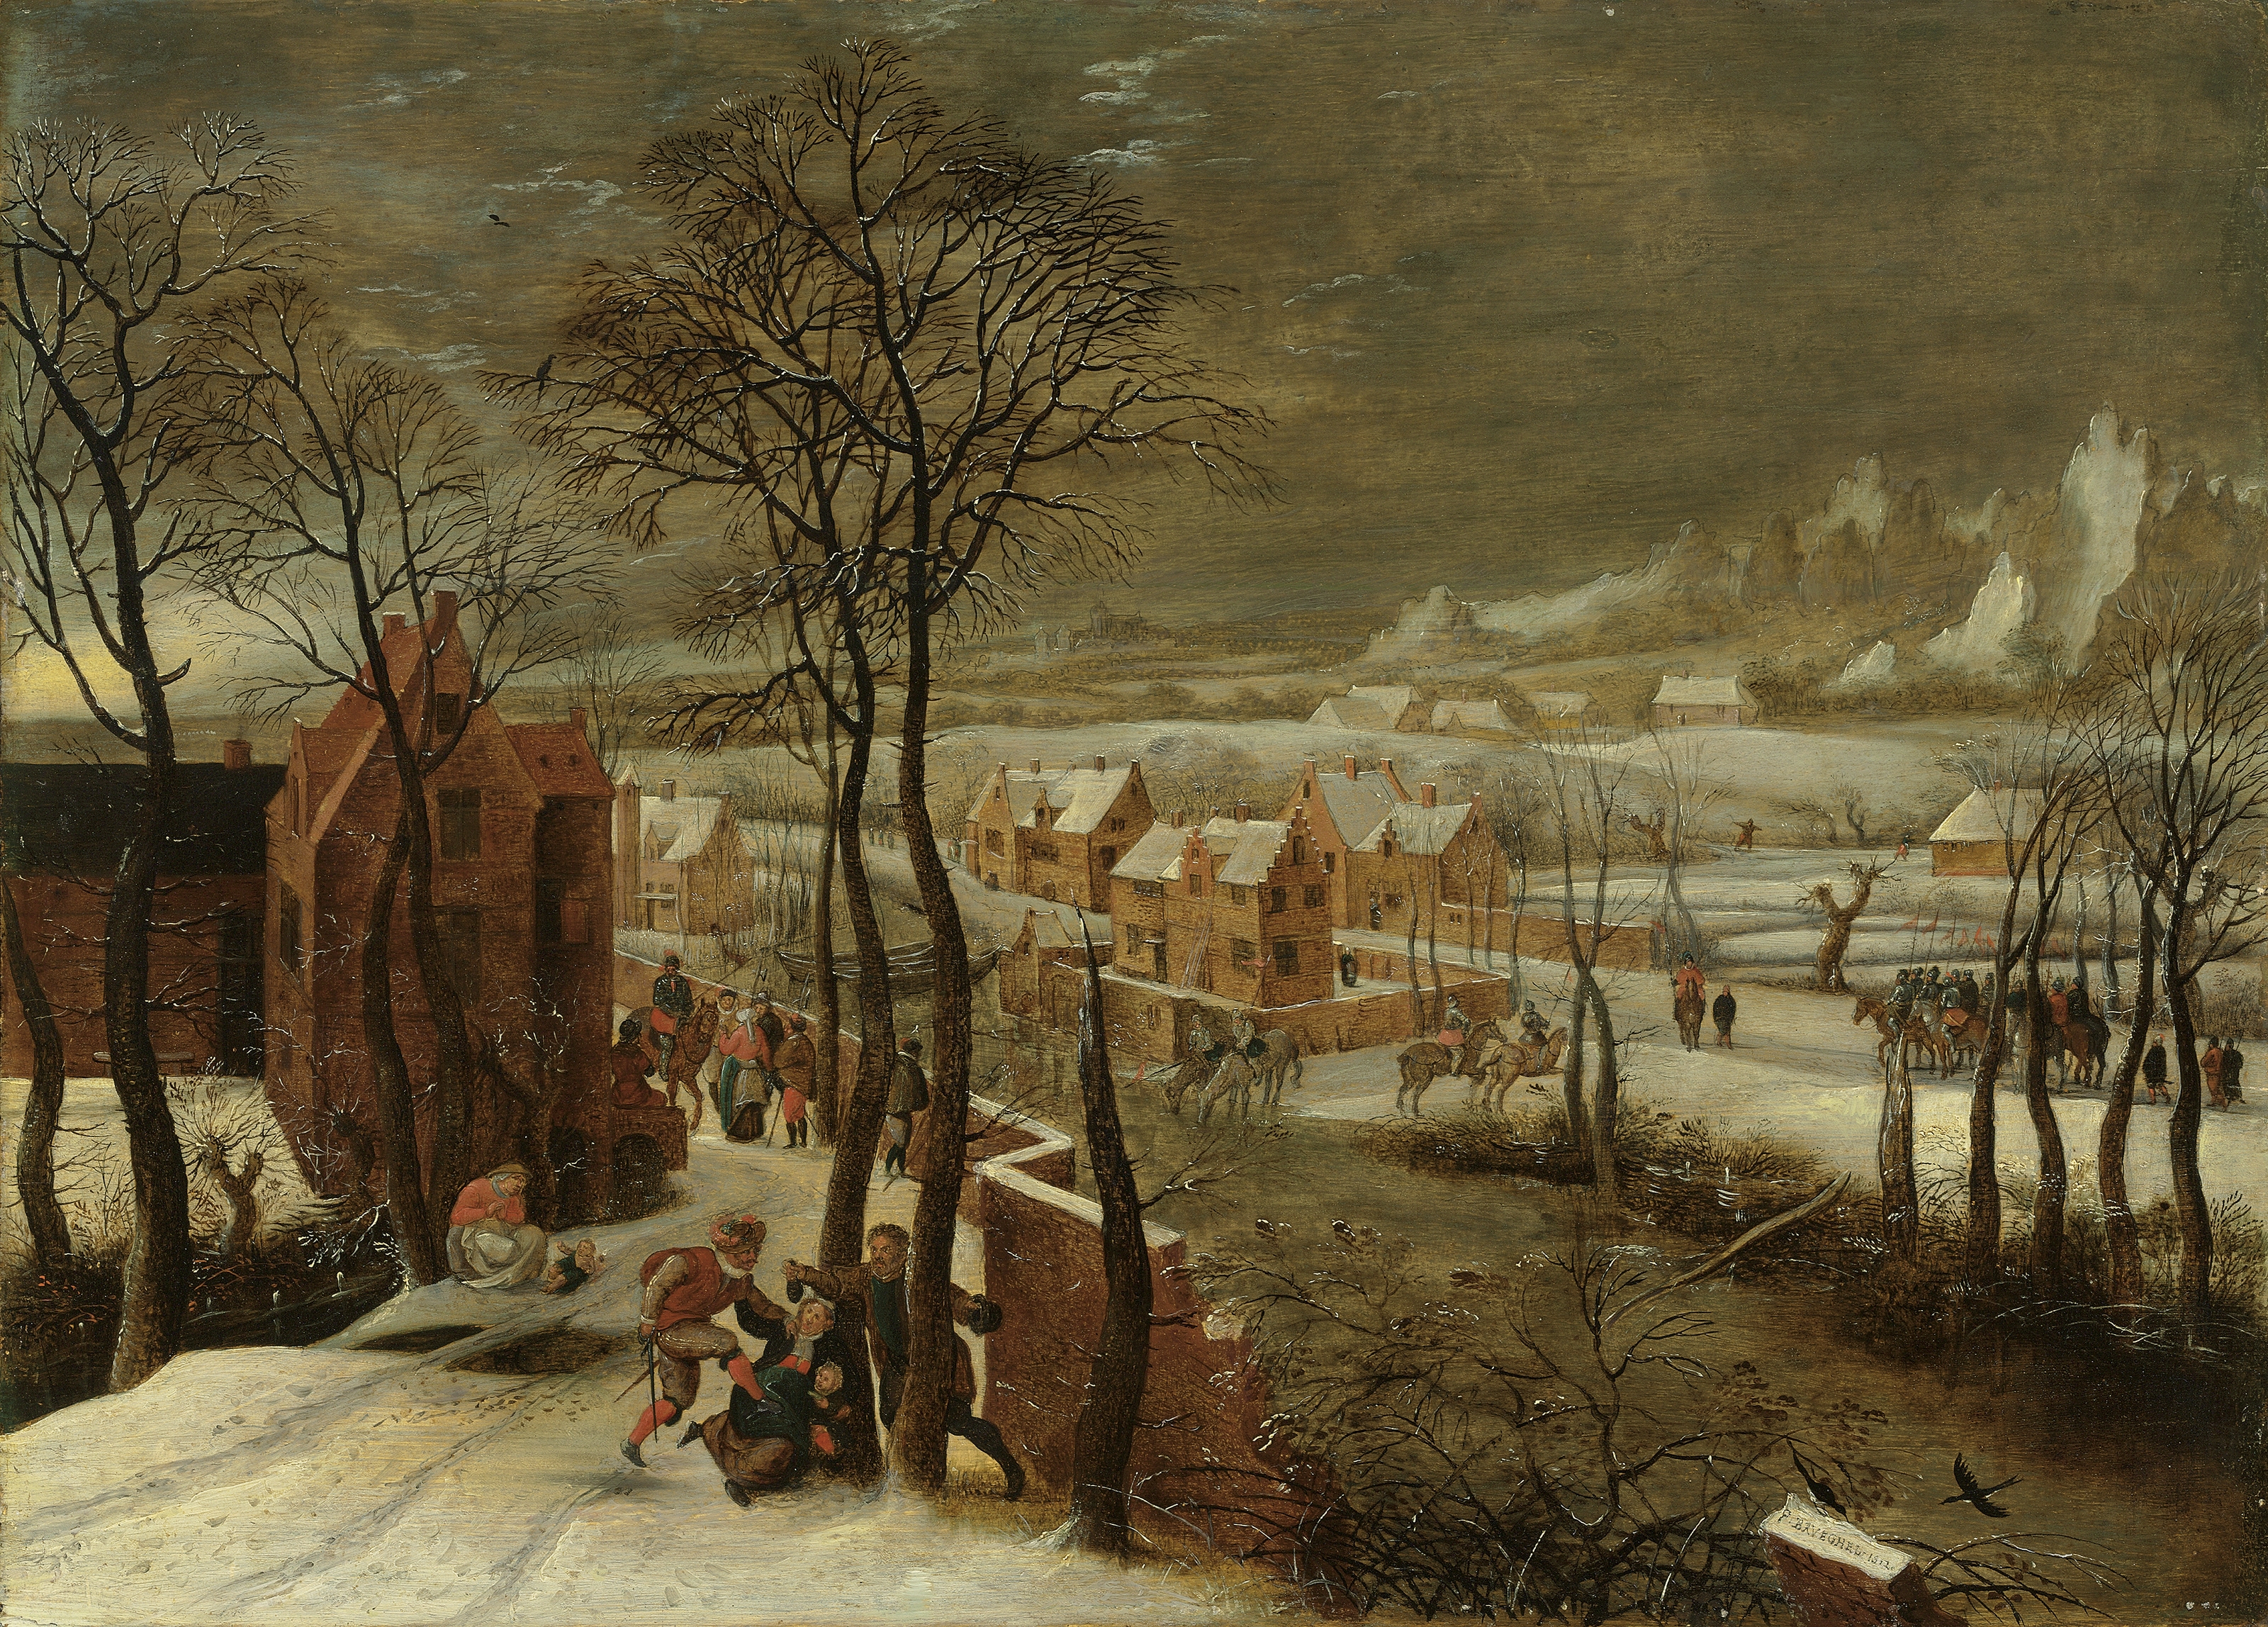 Winter landscape by Pieter Brueghel the Younger, 1612